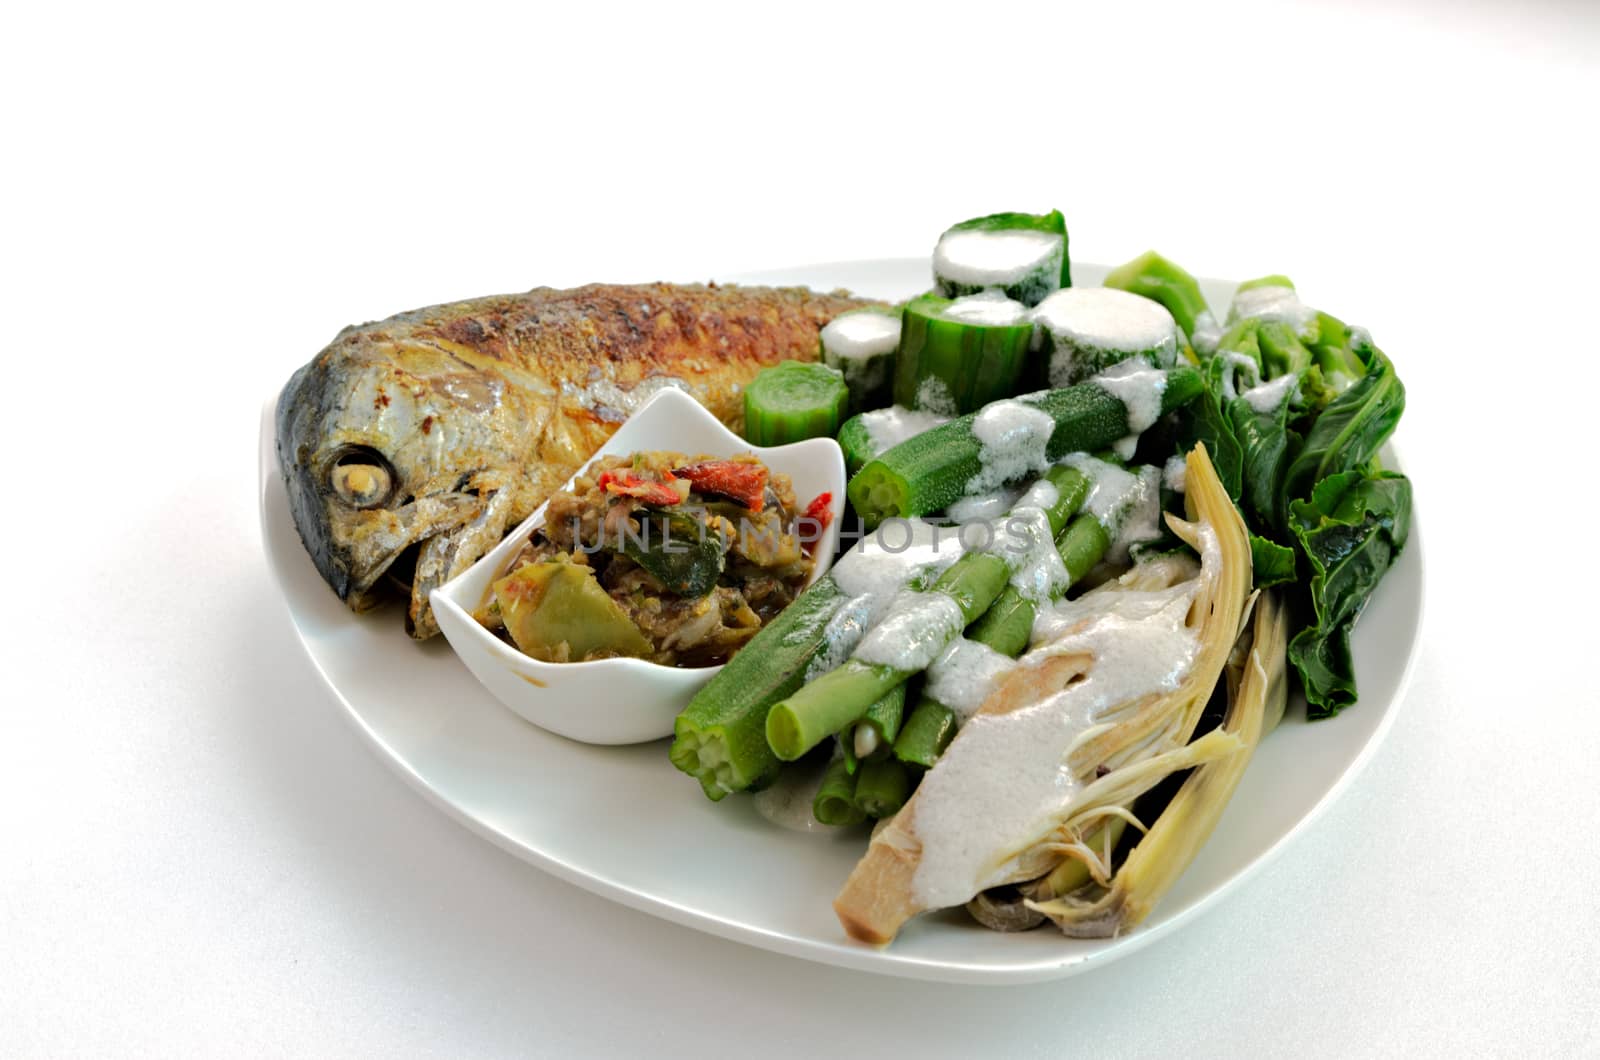 Fired mackerel with chili paste and steam vegetable by hatoriz